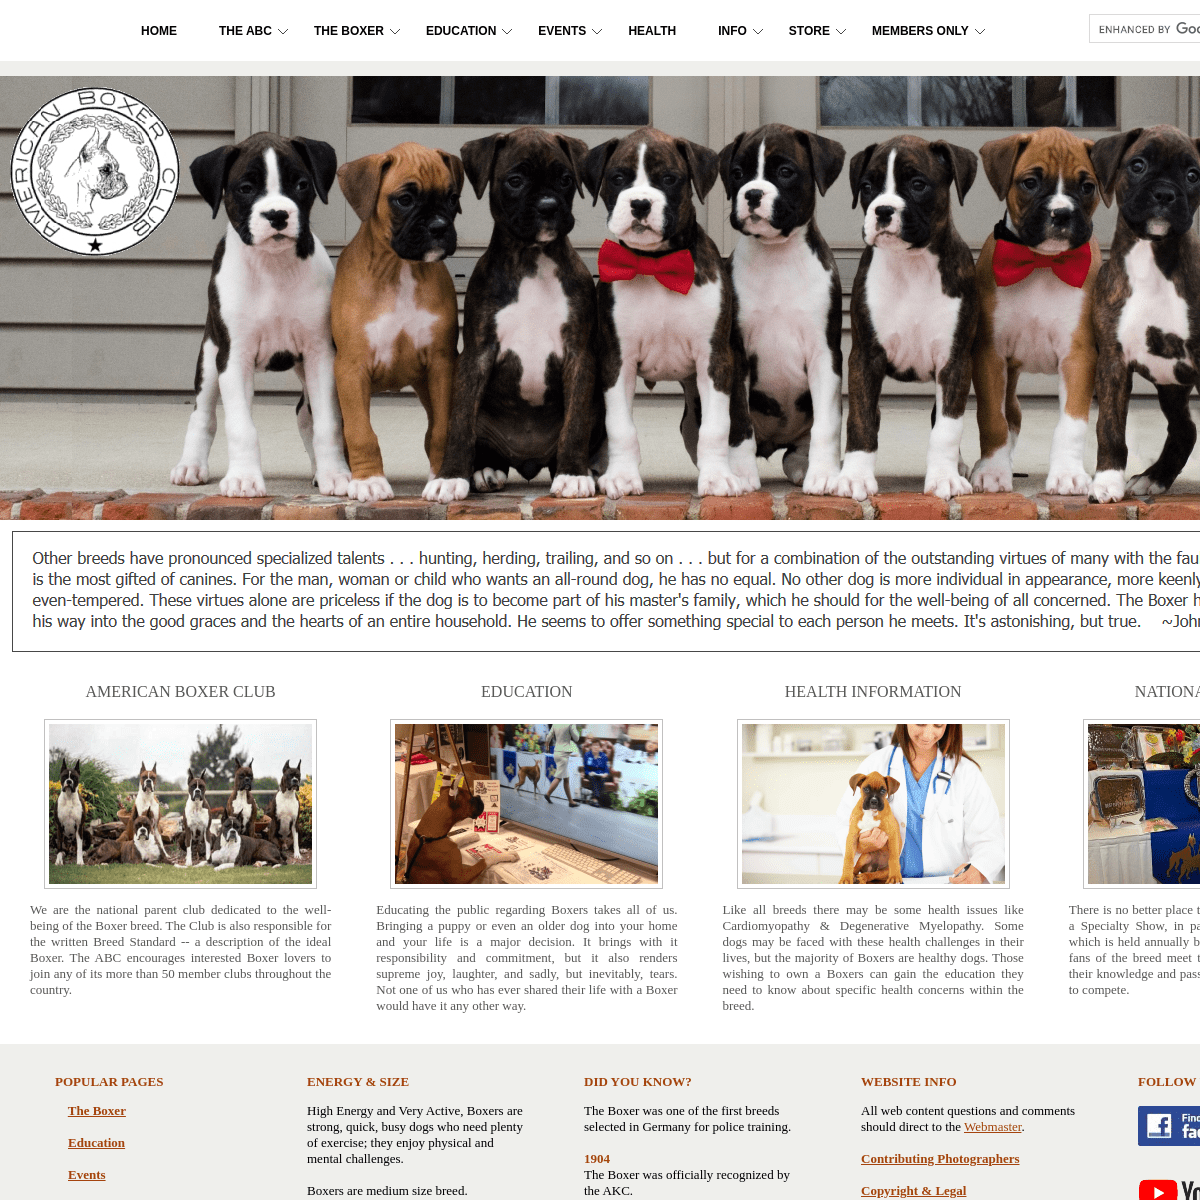 A complete backup of https://americanboxerclub.org